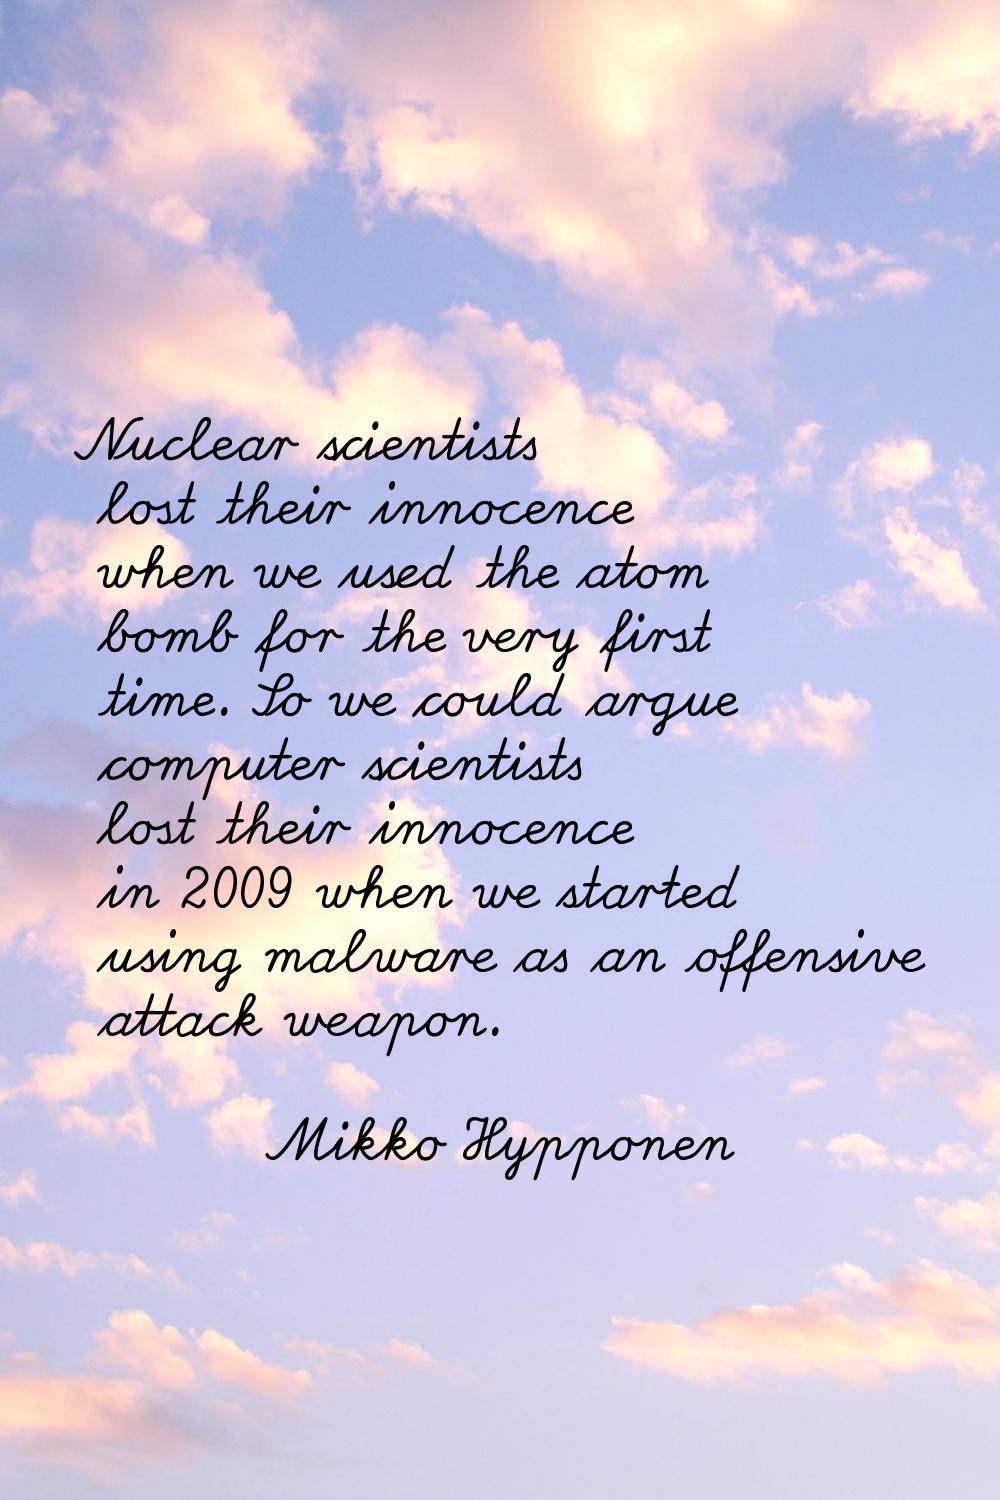 Nuclear scientists lost their innocence when we used the atom bomb for the very first time. So we c